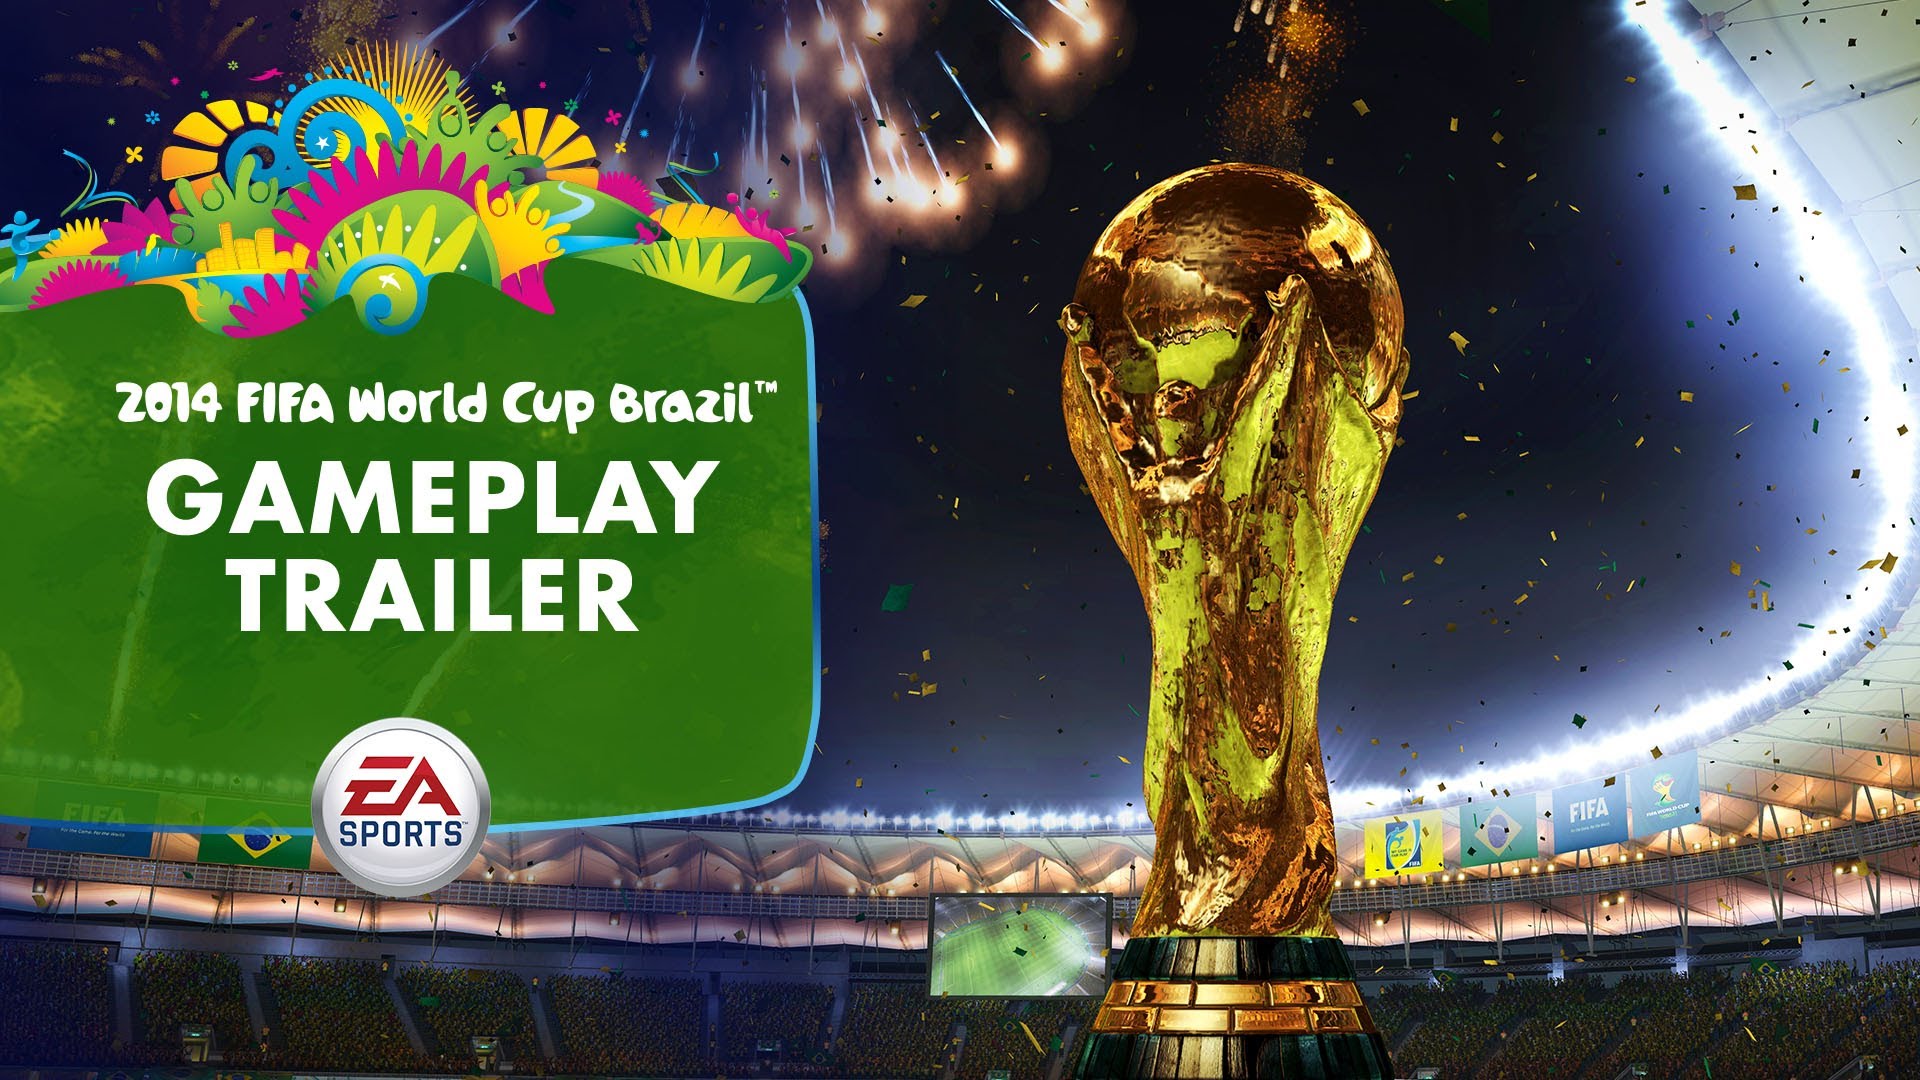 EA SPORTS 2014 FIFA World Cup - Gameplay Trailer - YouTube